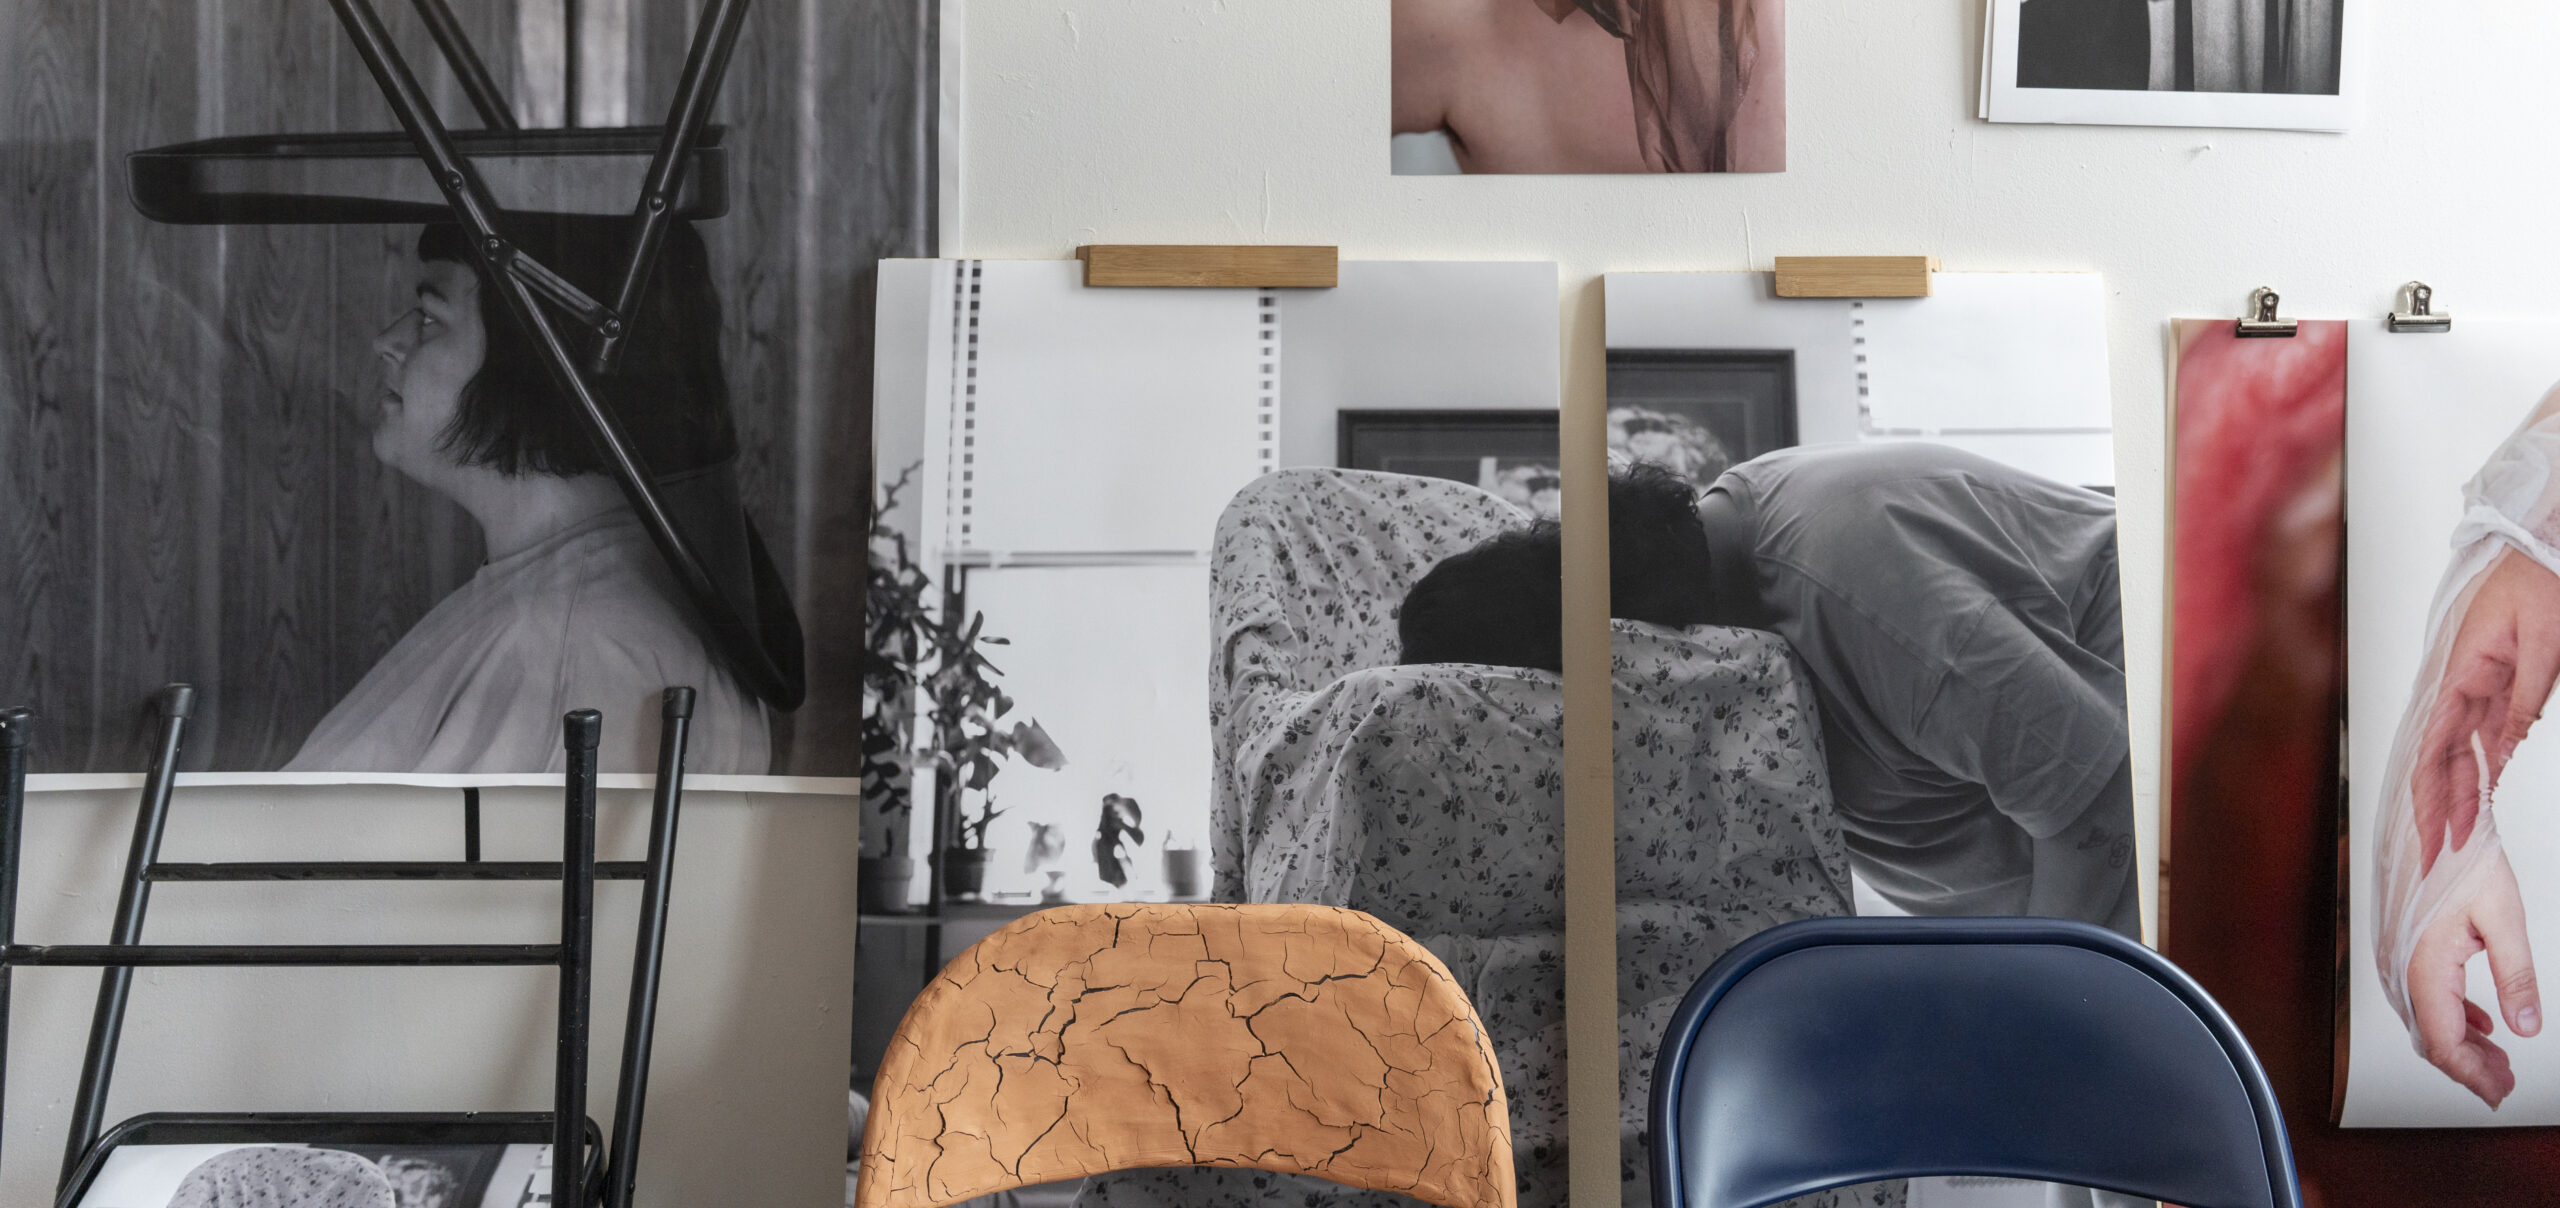 A photography student's cluttered studio, with images of the student and by the student, furniture, and multi media